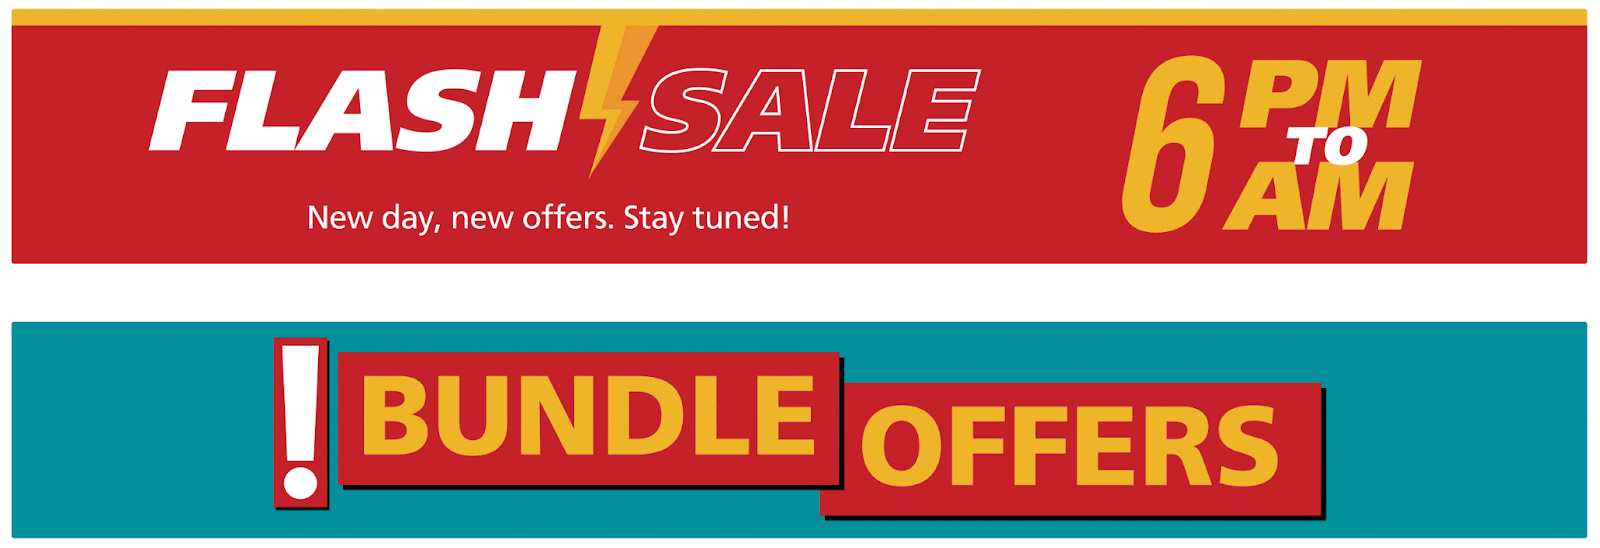 The Flash Sales that Home Center is running on their website and app all week ensure return customers to their online store with the purpose of catching good deals.